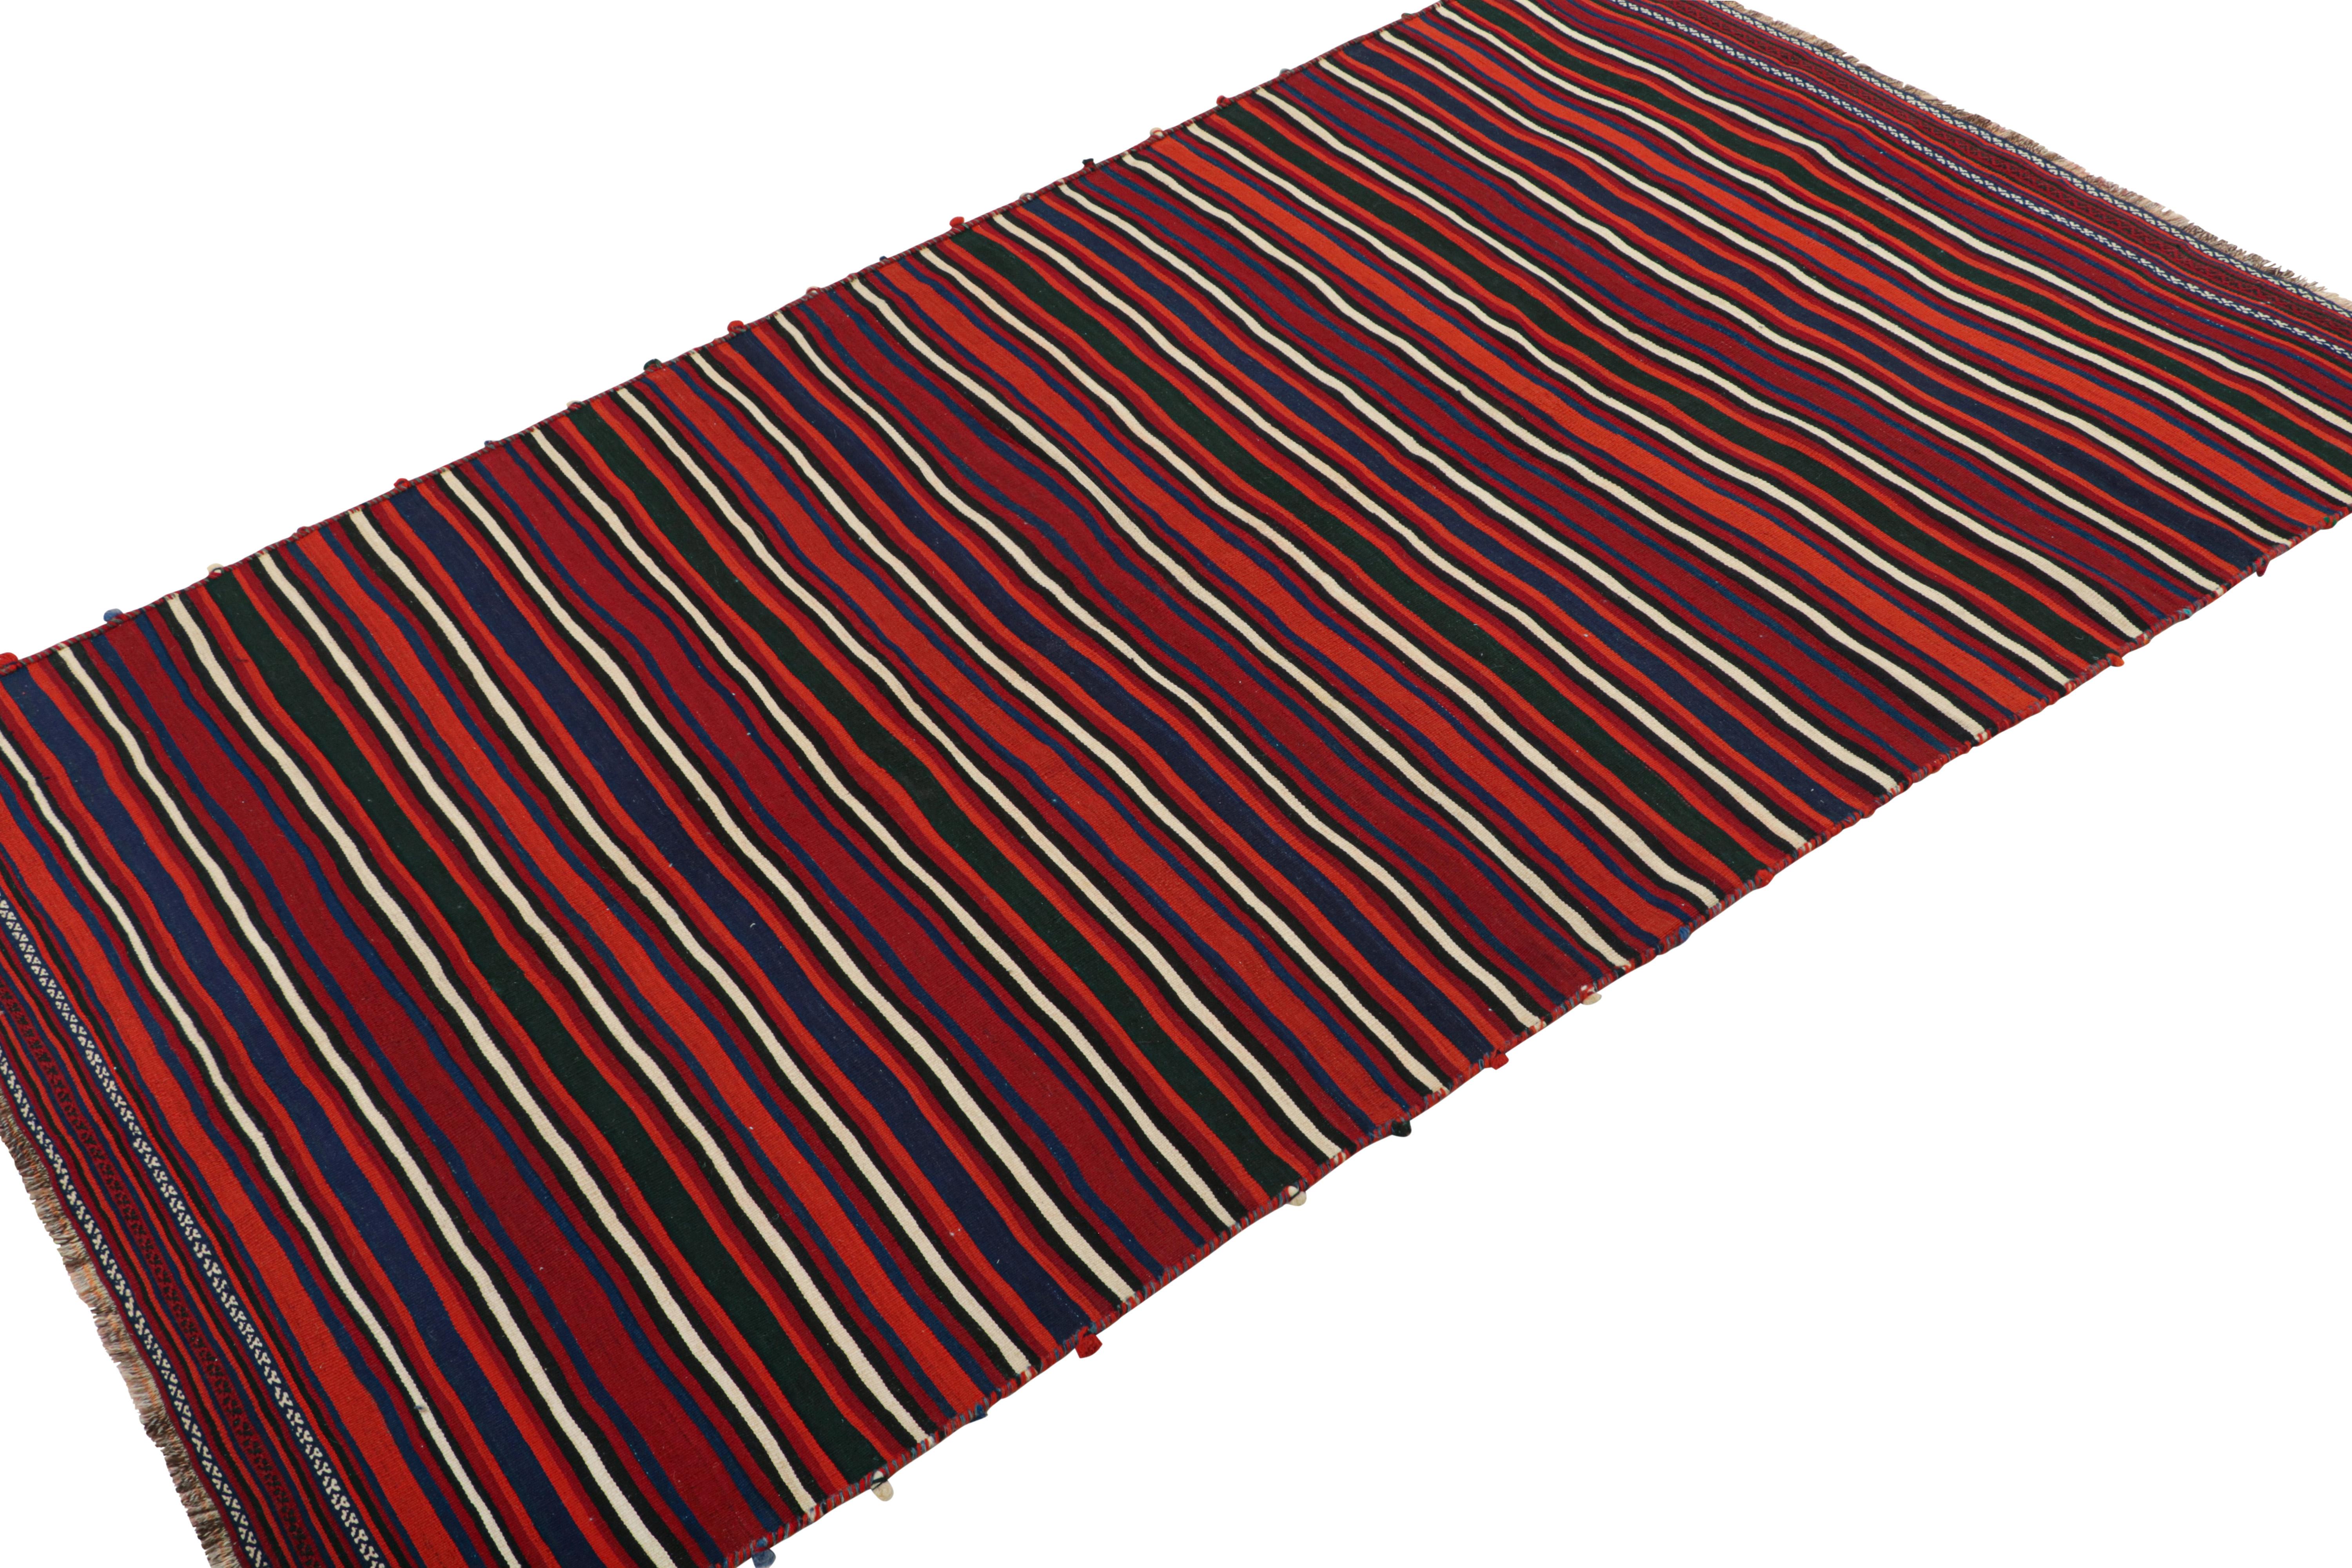 Tribal Vintage Persian Kilim with Burgundy Red and Navy Blue Stripes For Sale